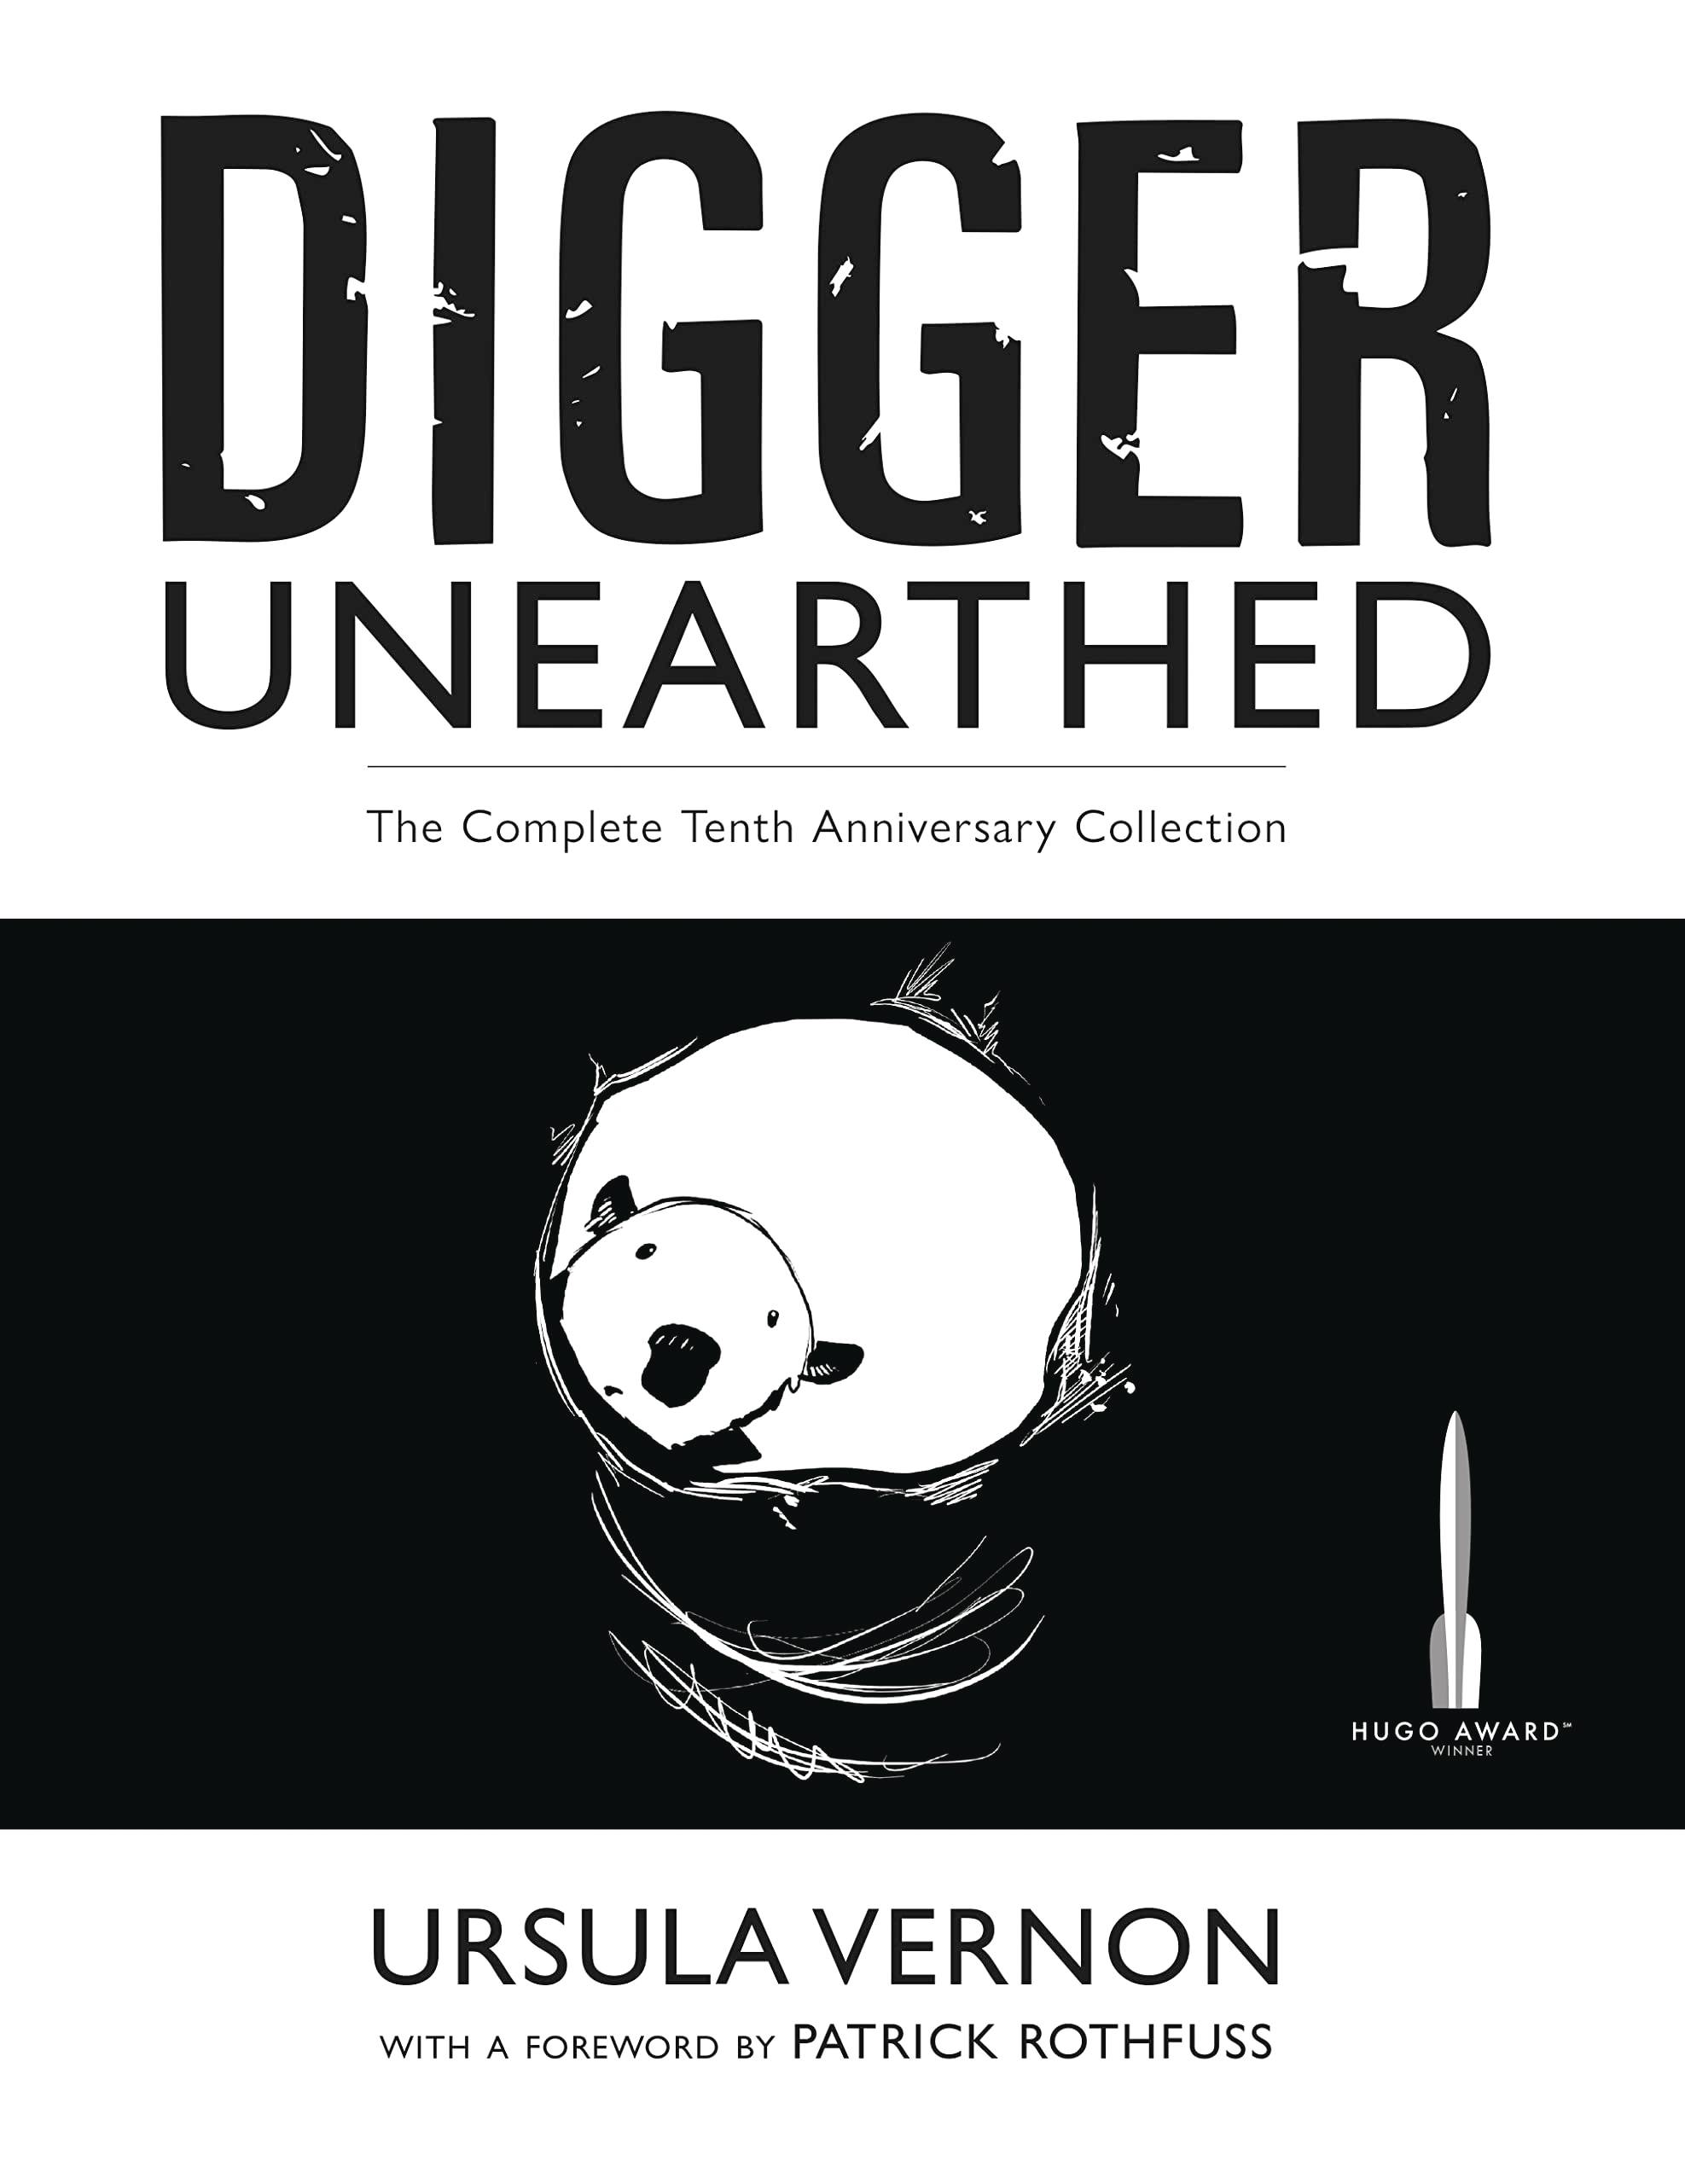 DIGGER UNEARTHED COMP 10TH ANNIV COLL HC